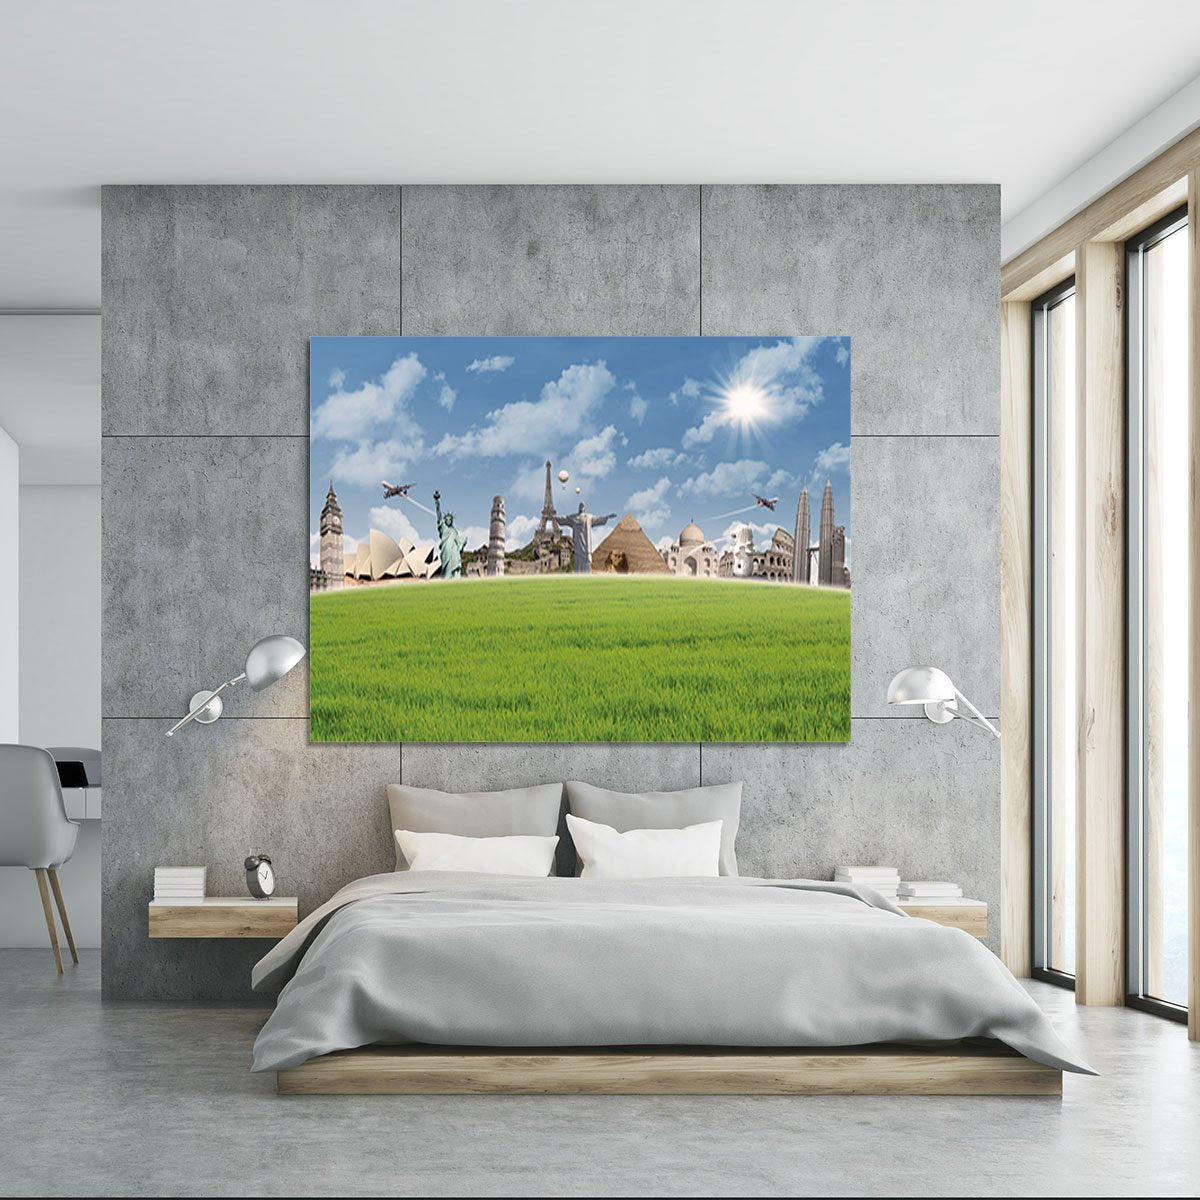 Picture of different landmarks Canvas Print or Poster